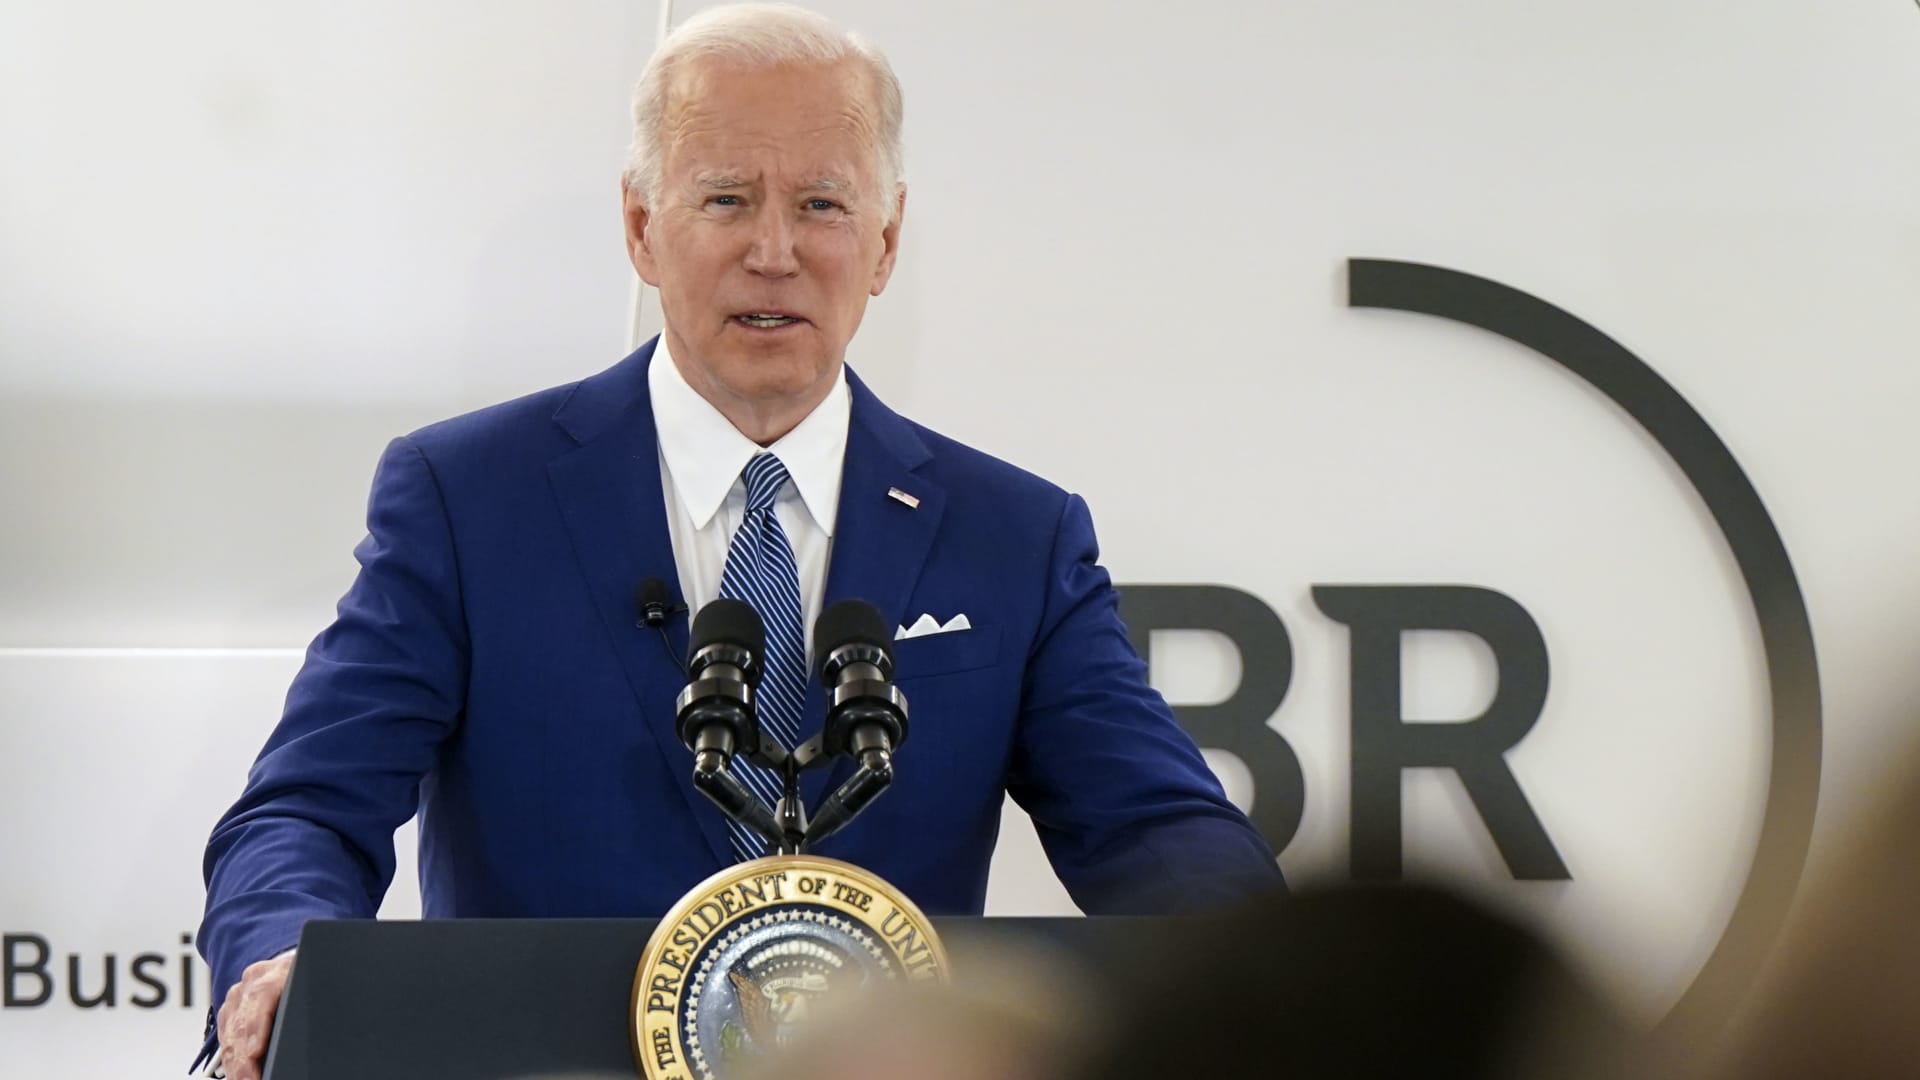 U.S. President Joe Biden speaks while joining the Business Roundtable's chief executive officer quarterly meeting in Washington, D.C., U.S., on Monday, March 21, 2022.